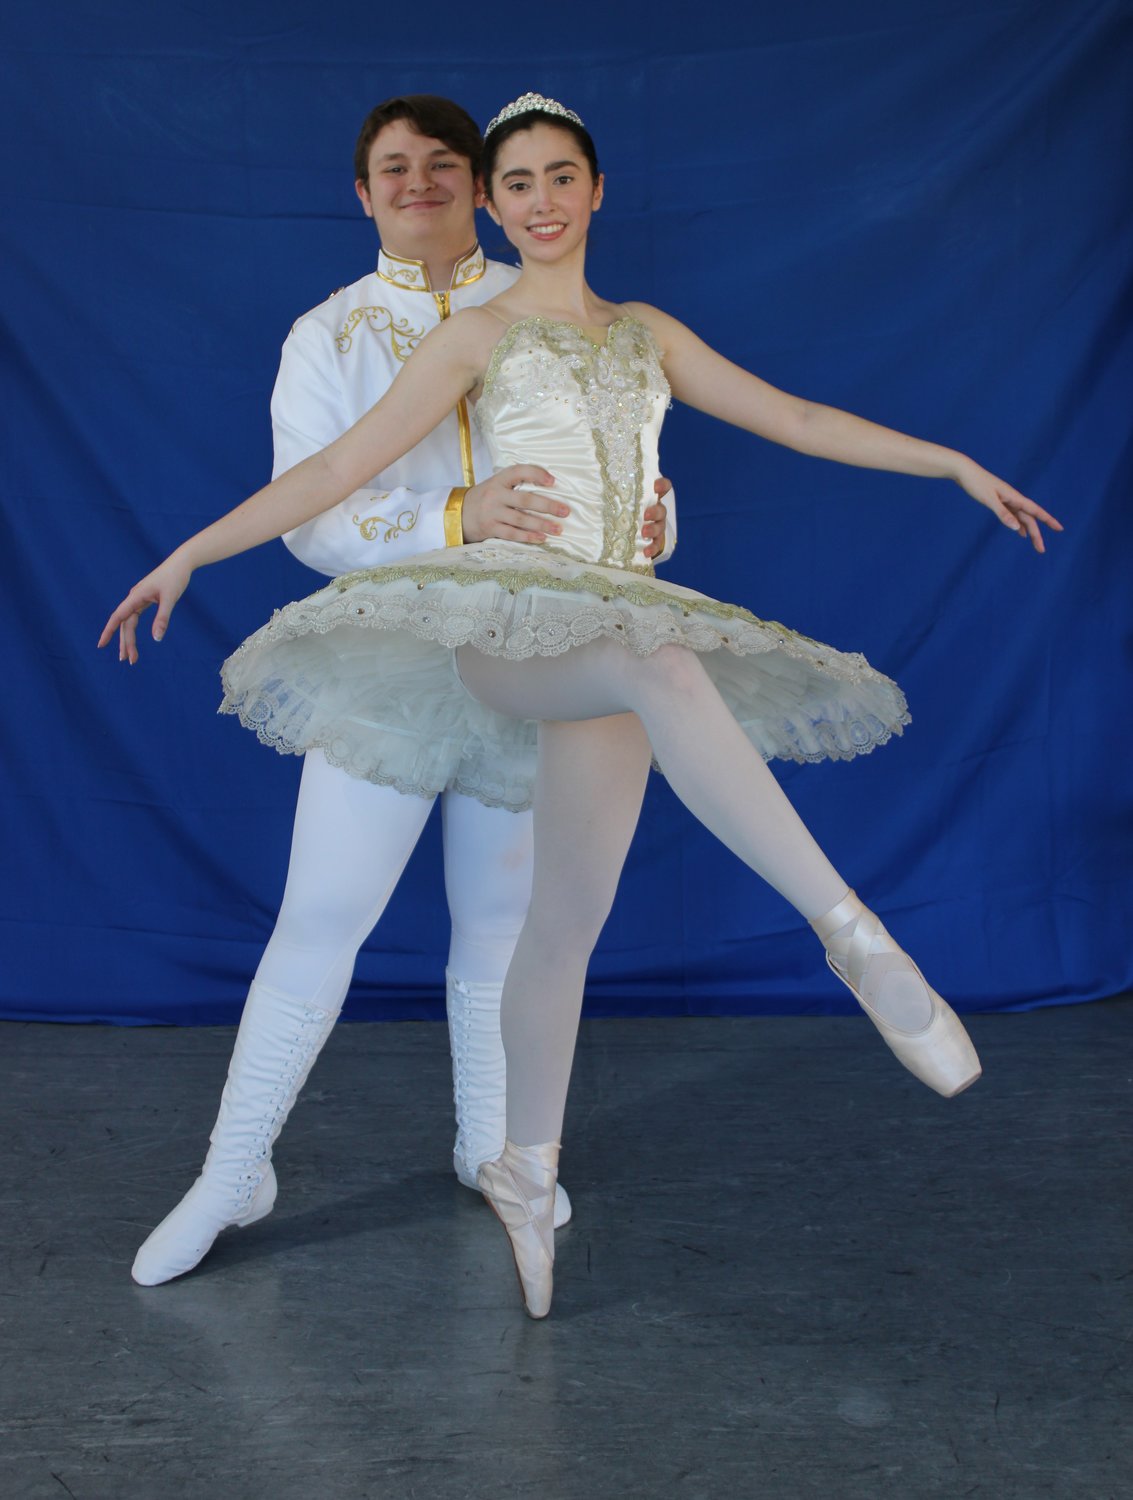 Josephine Amato and Tyler Powley will dance the roles of Princess Aurora and Prince Désiré in a performance of “The Sleeping Beauty” on Sunday, May 15 at 2 p.m.